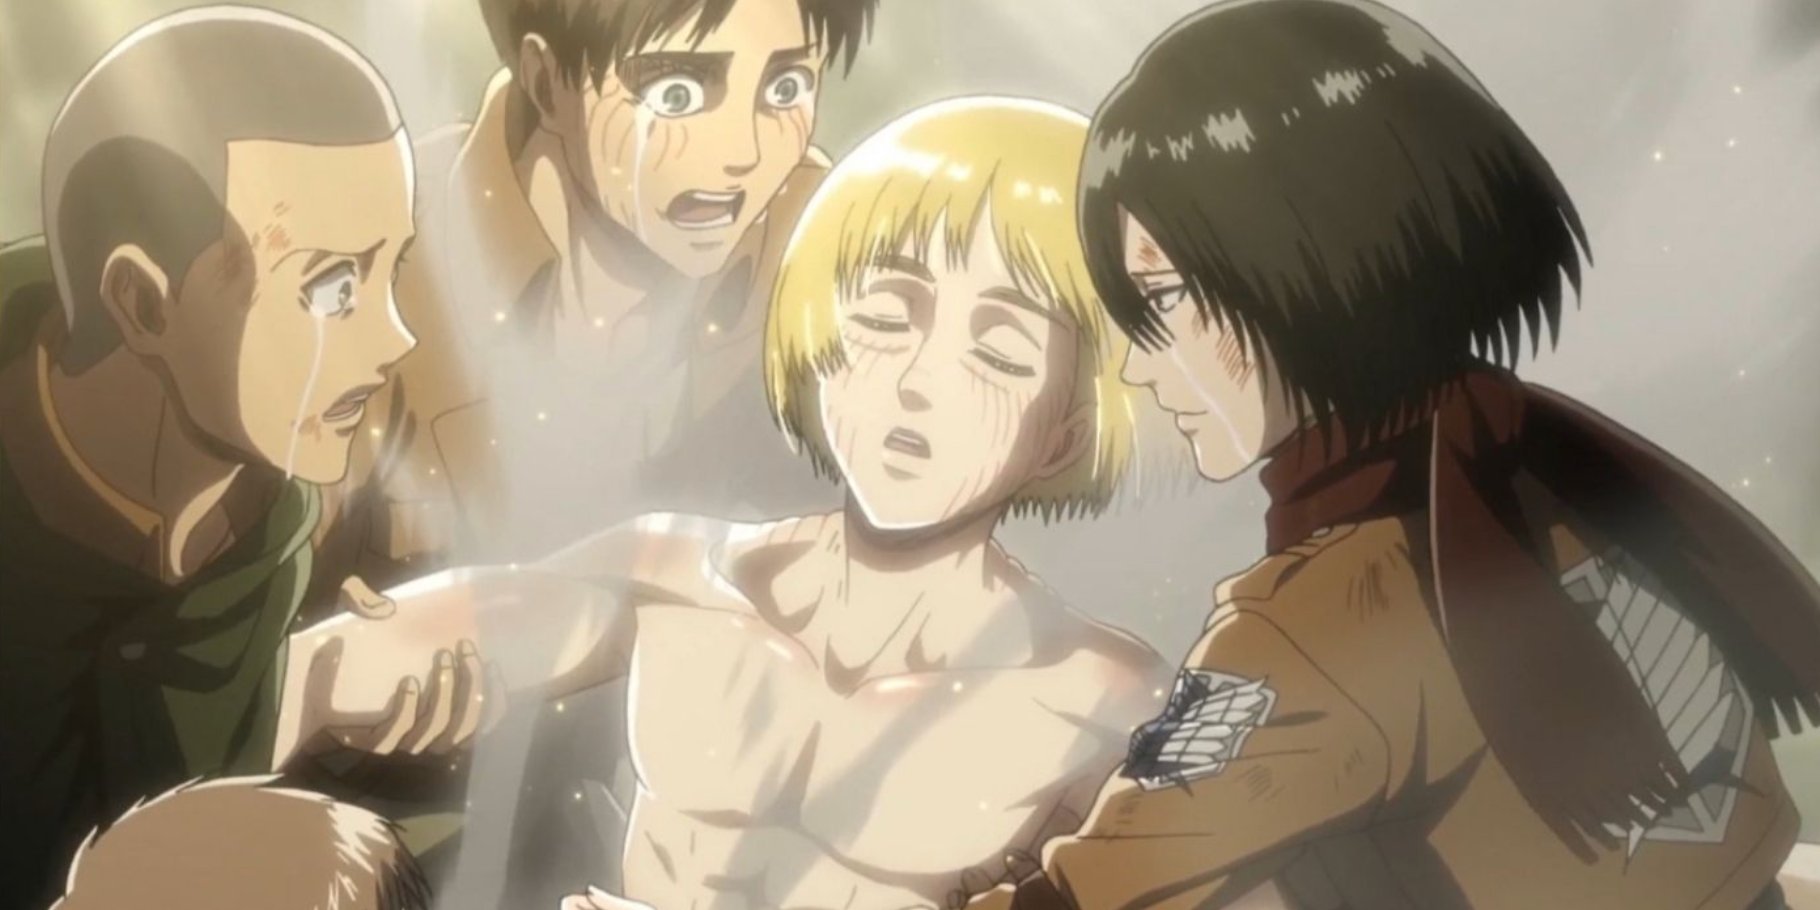 Armin surrounded by friends